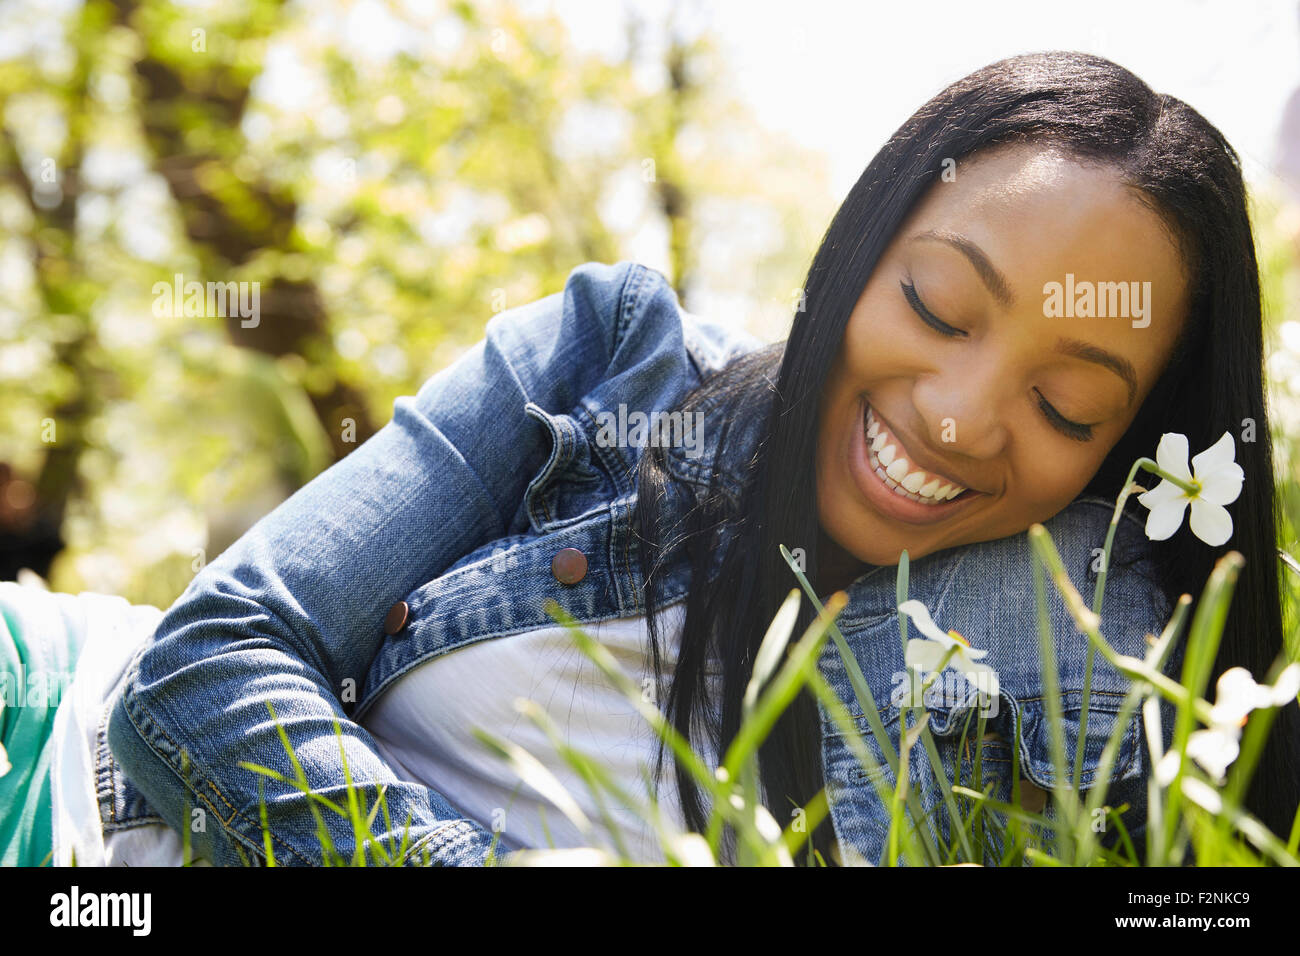 Black woman smiling in grass in park Stock Photo